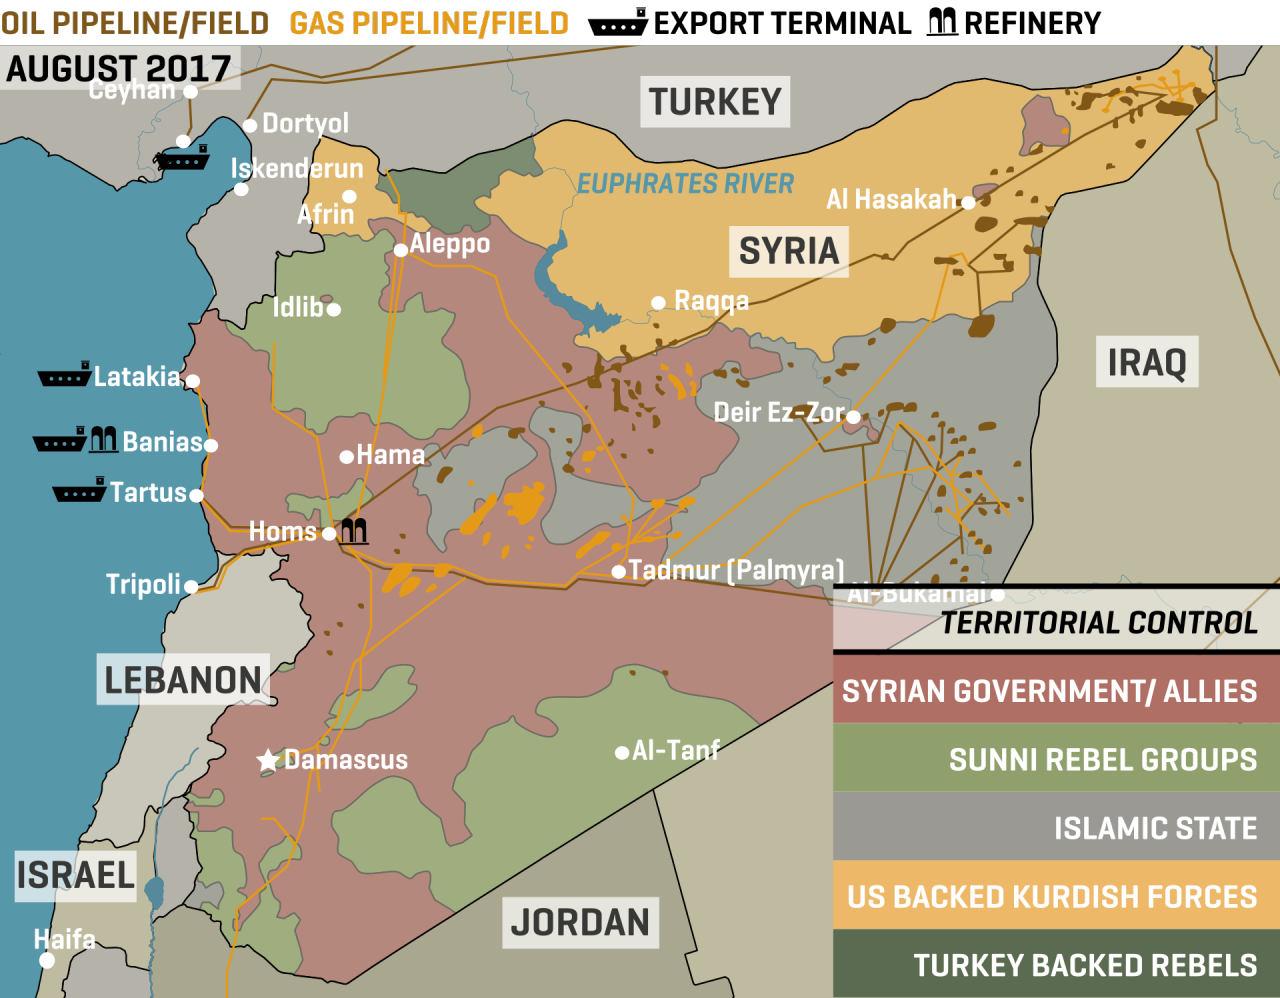 Syria’s Political Divisions & Energy Infrastructure Then